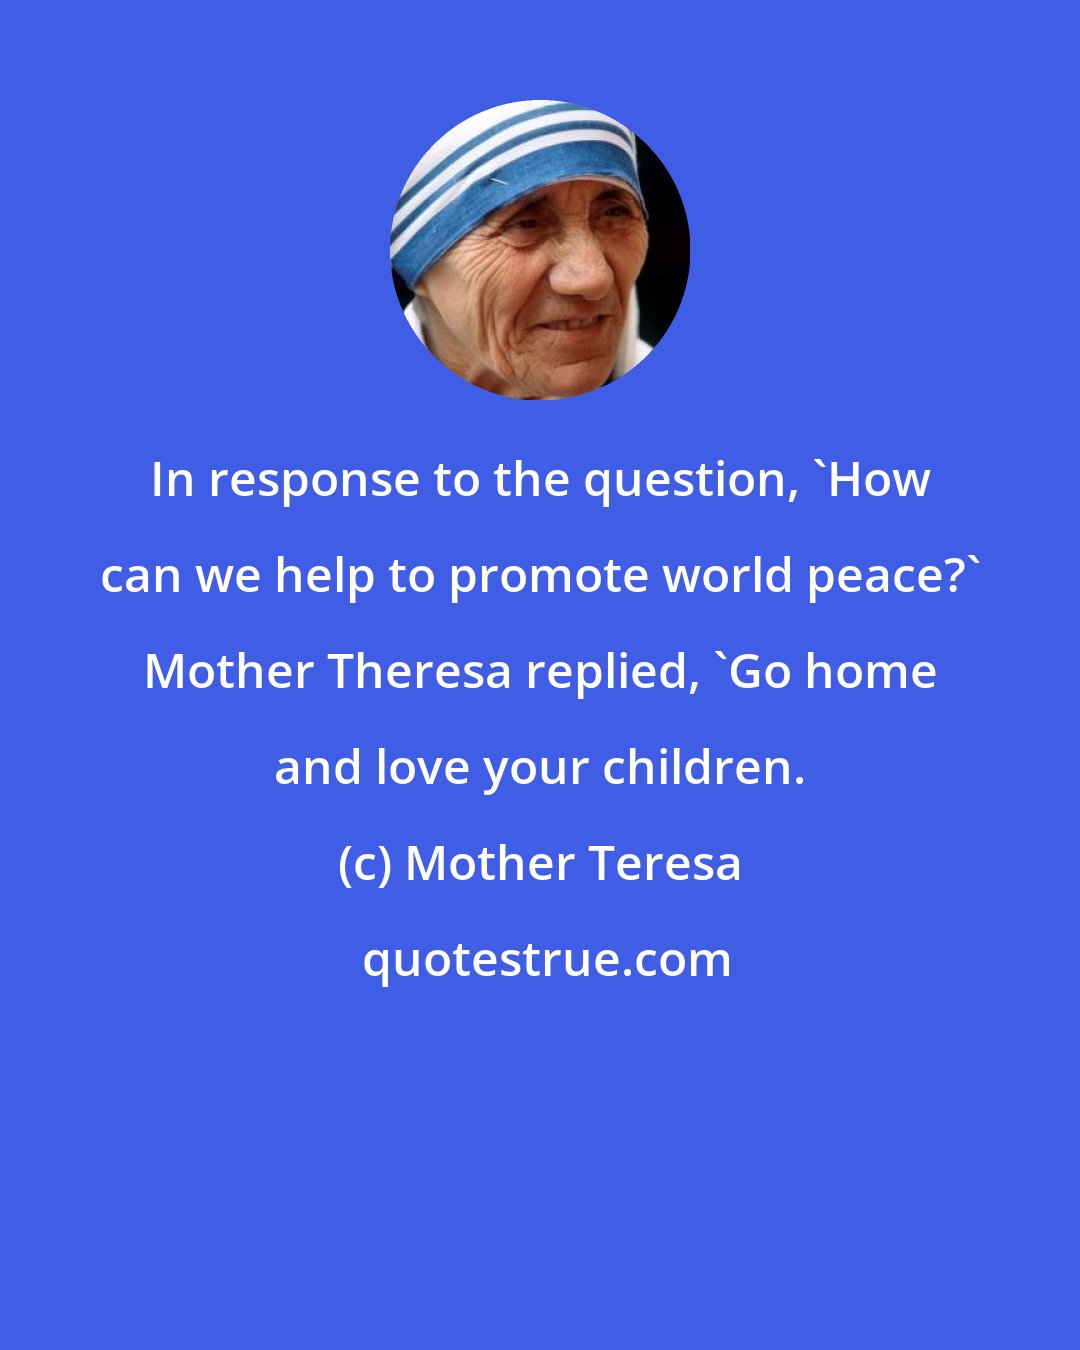 Mother Teresa: In response to the question, 'How can we help to promote world peace?' Mother Theresa replied, 'Go home and love your children.